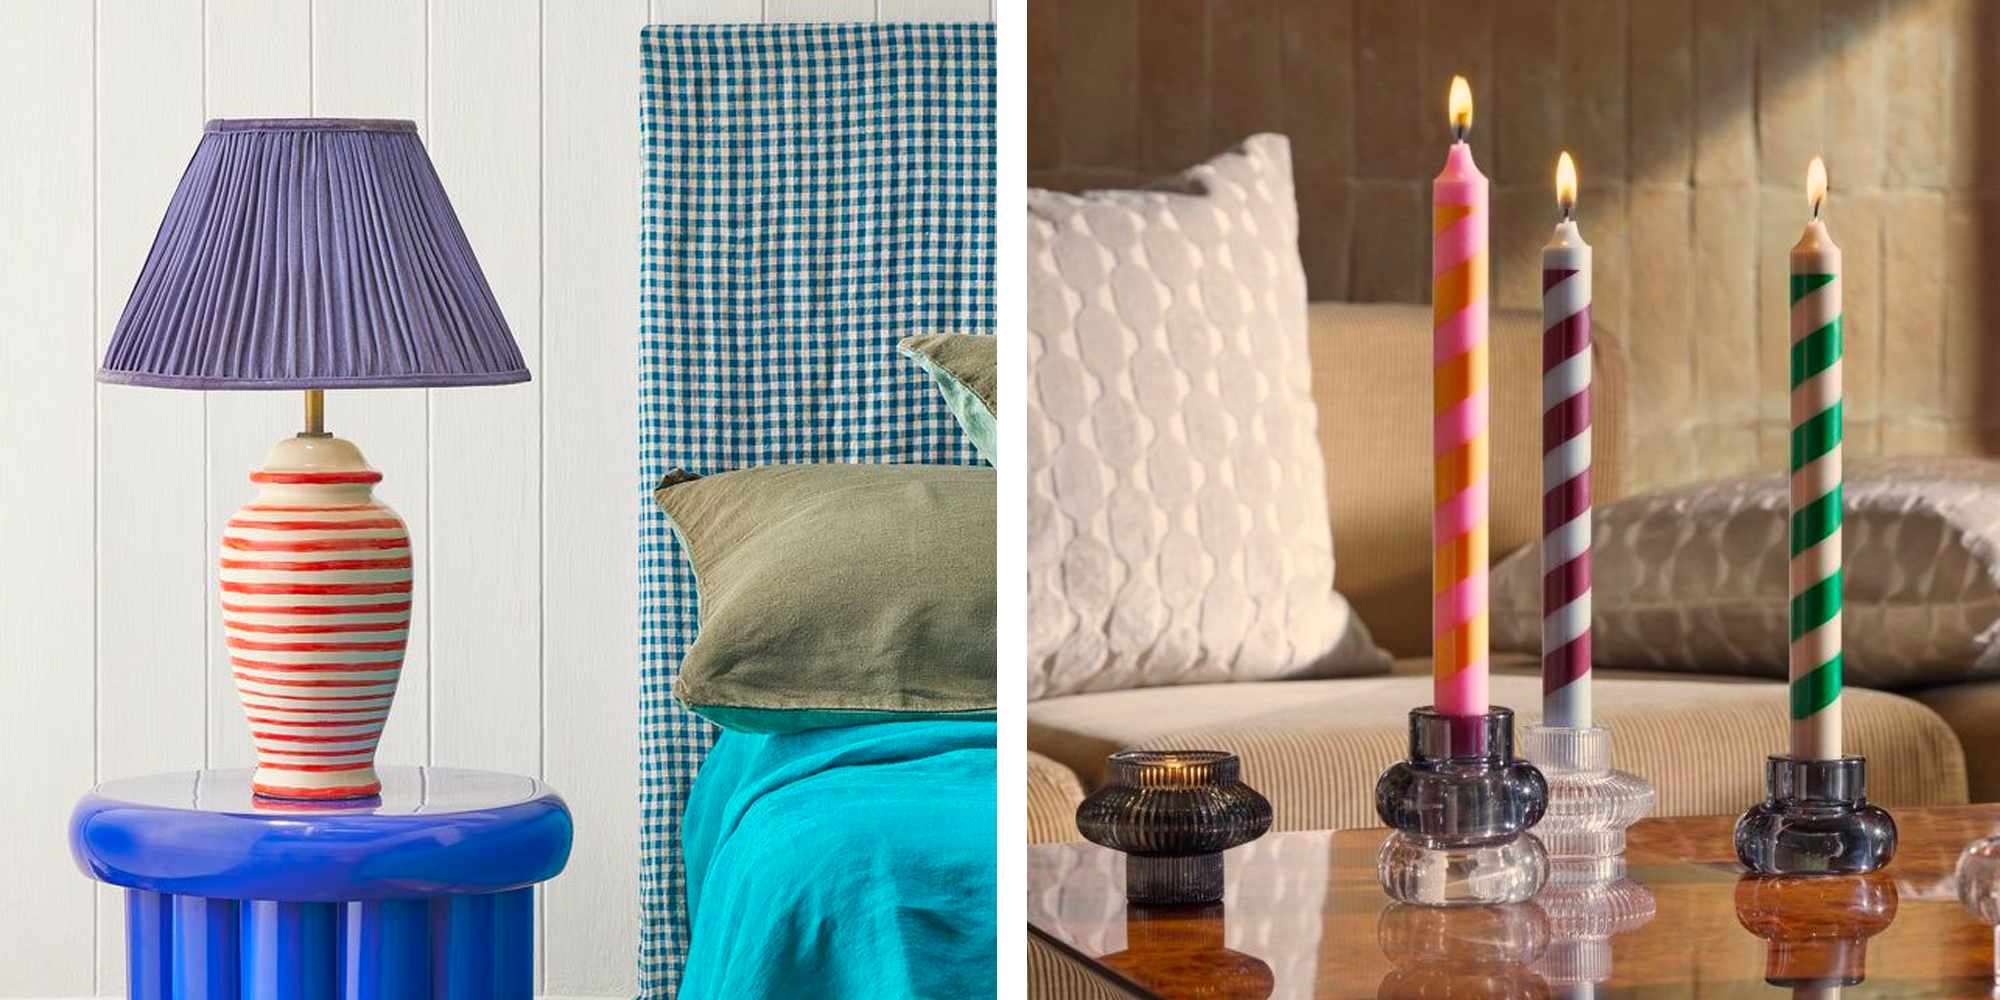 Striped Home Decor: 13 Understated Ways To Decorate With Stripes